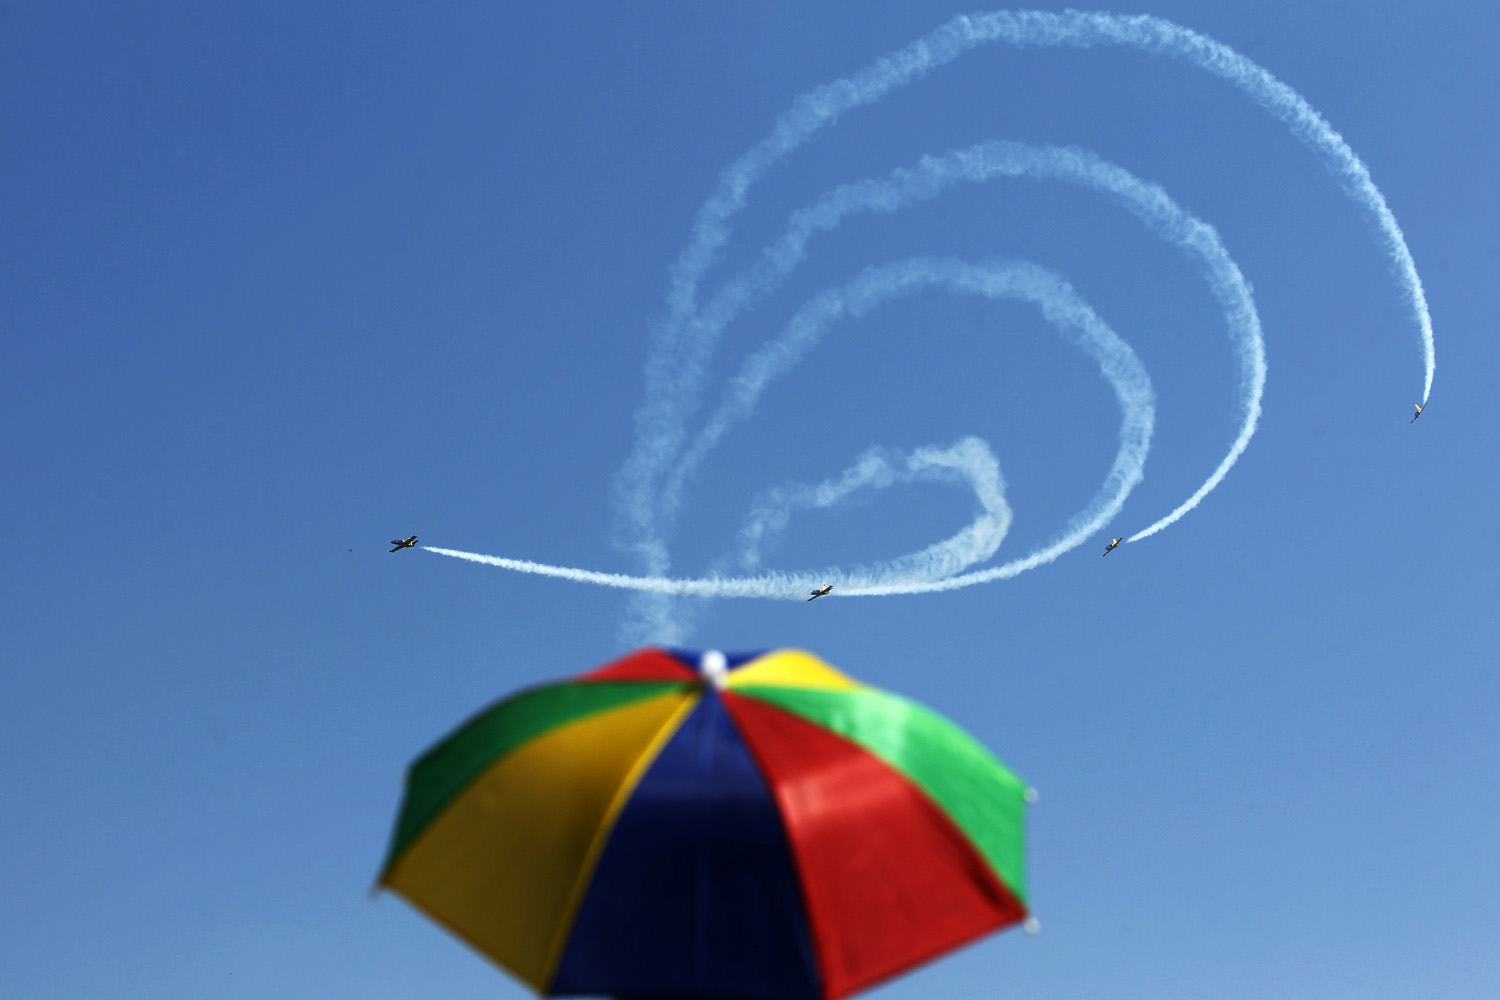 July 27, 2013. A man wearing a sun-protective umbrella watches Latvia's Baltic Bees aerobatic team performing on L-39C Albatross airplanes during Bucharest International Air Show at Baneasa airport.